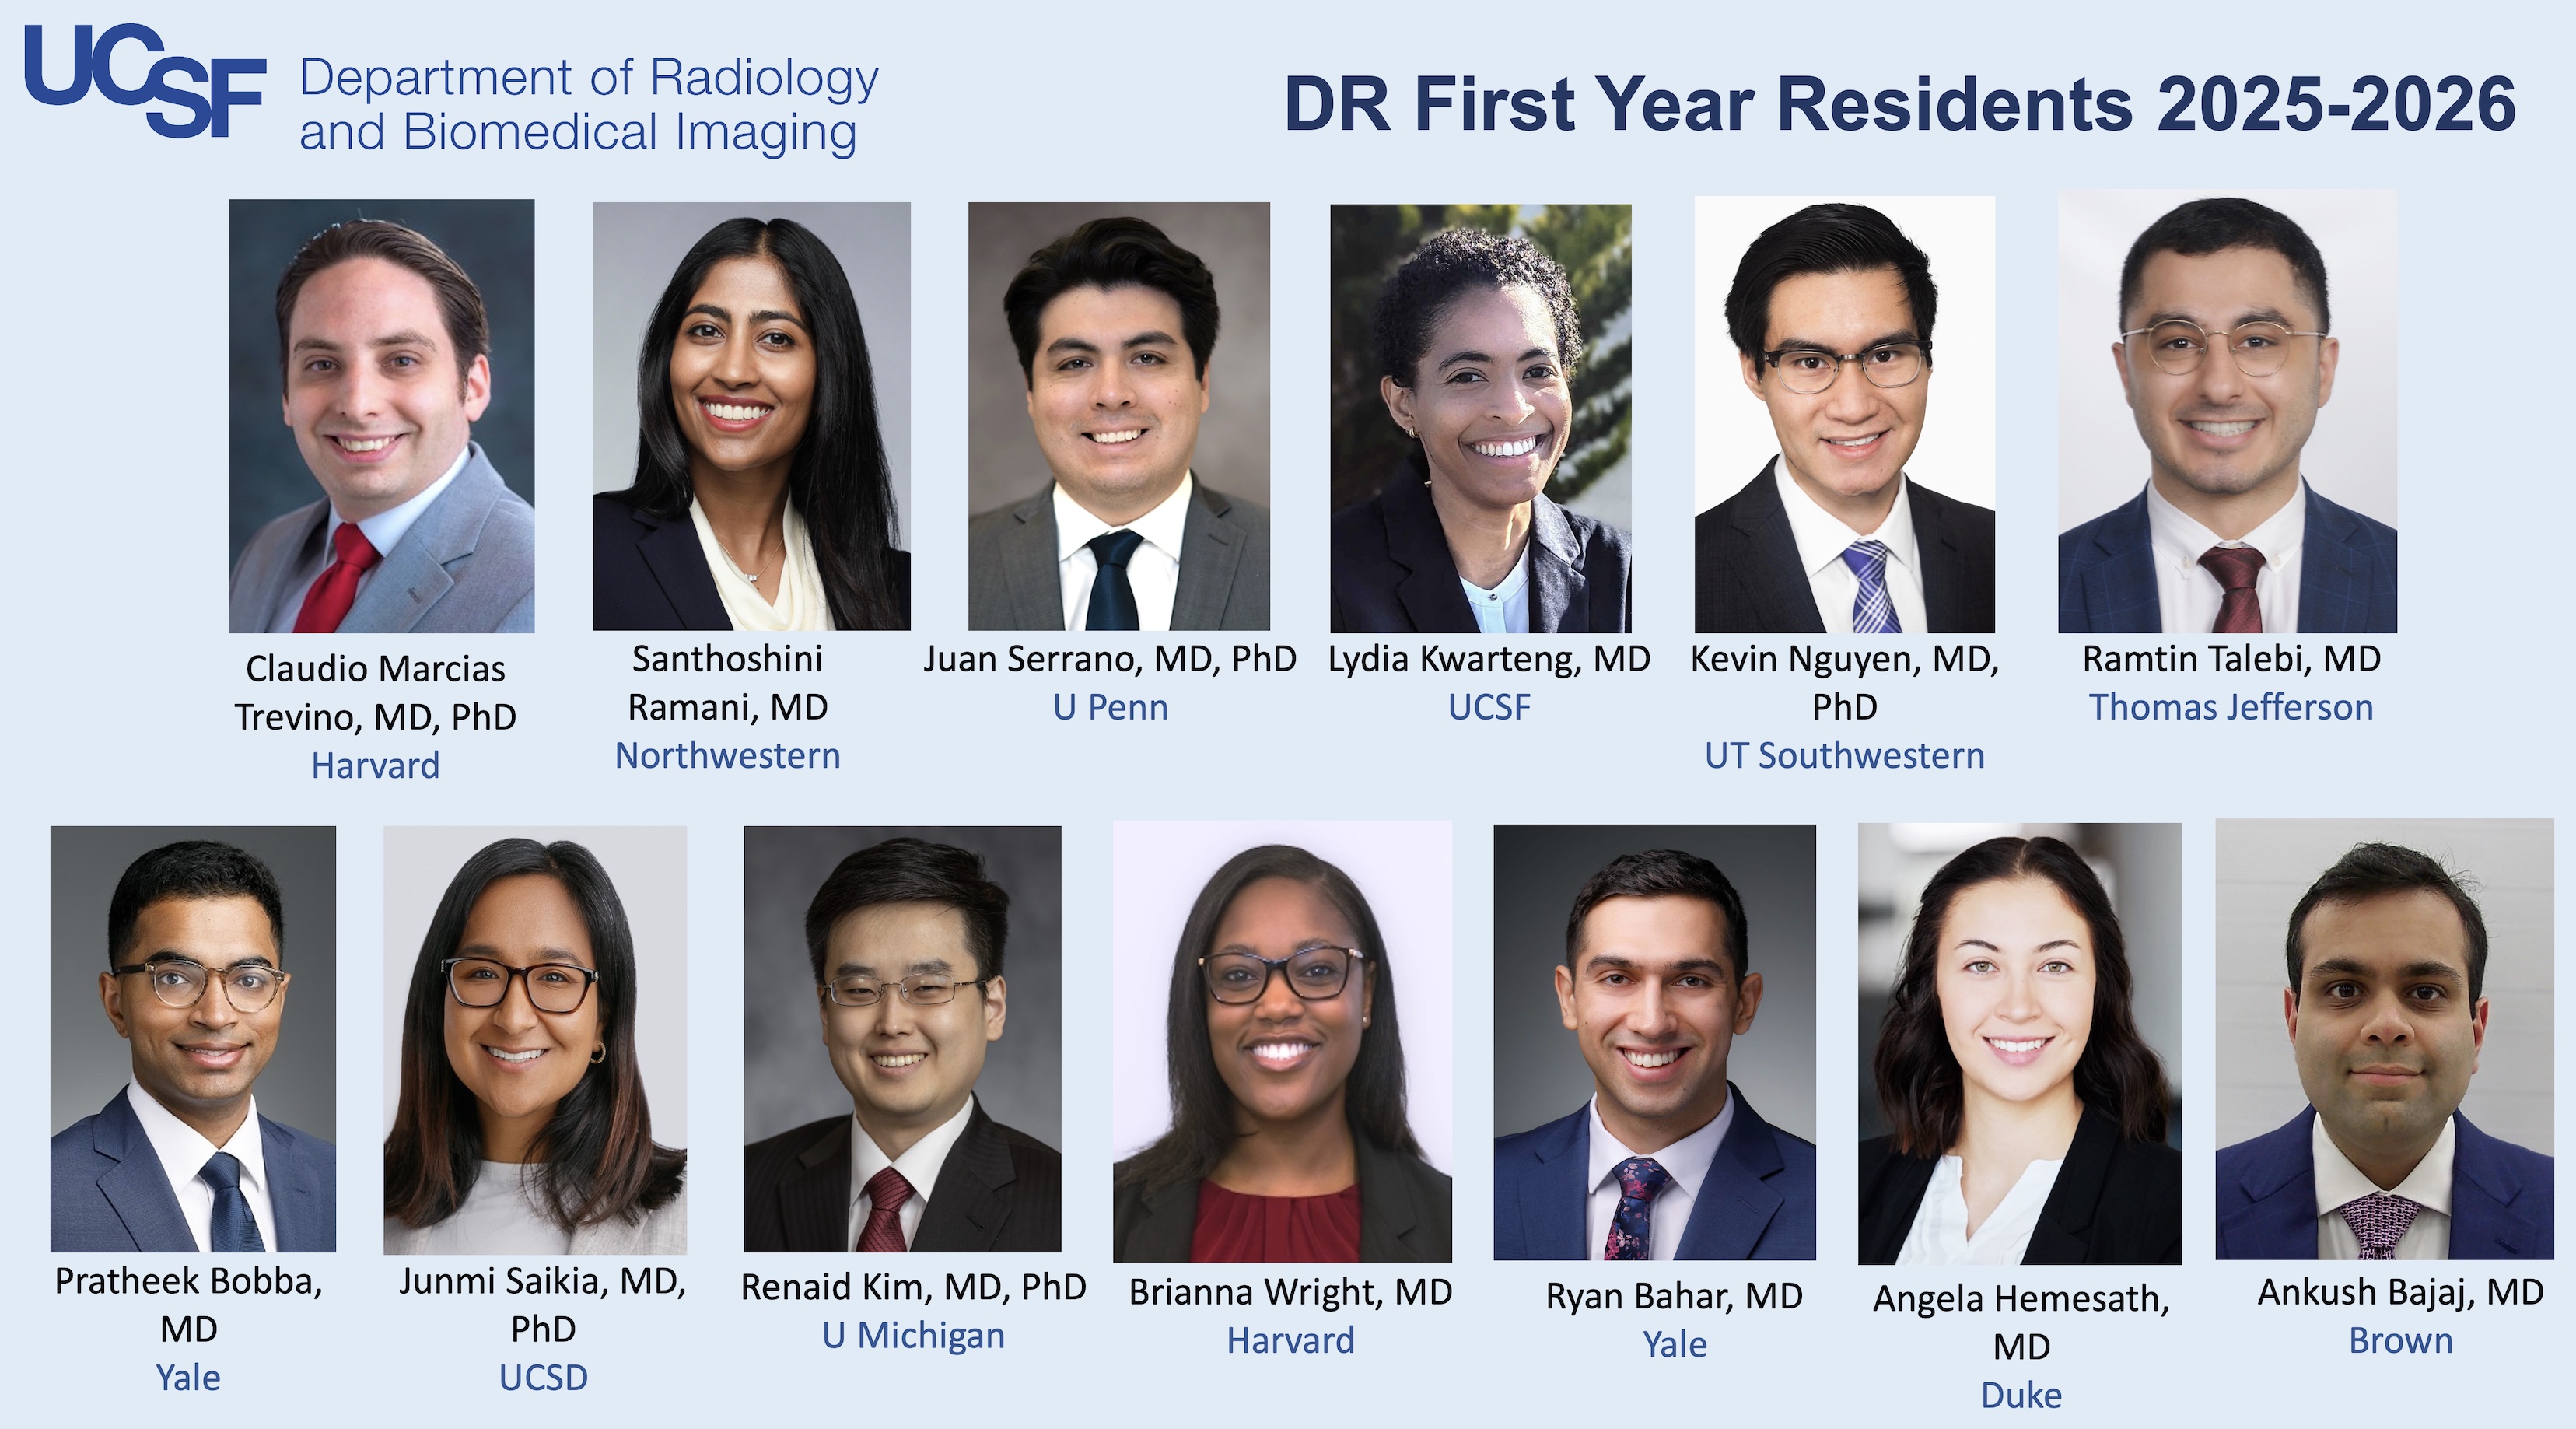 DR First Year Residents 2025-2026